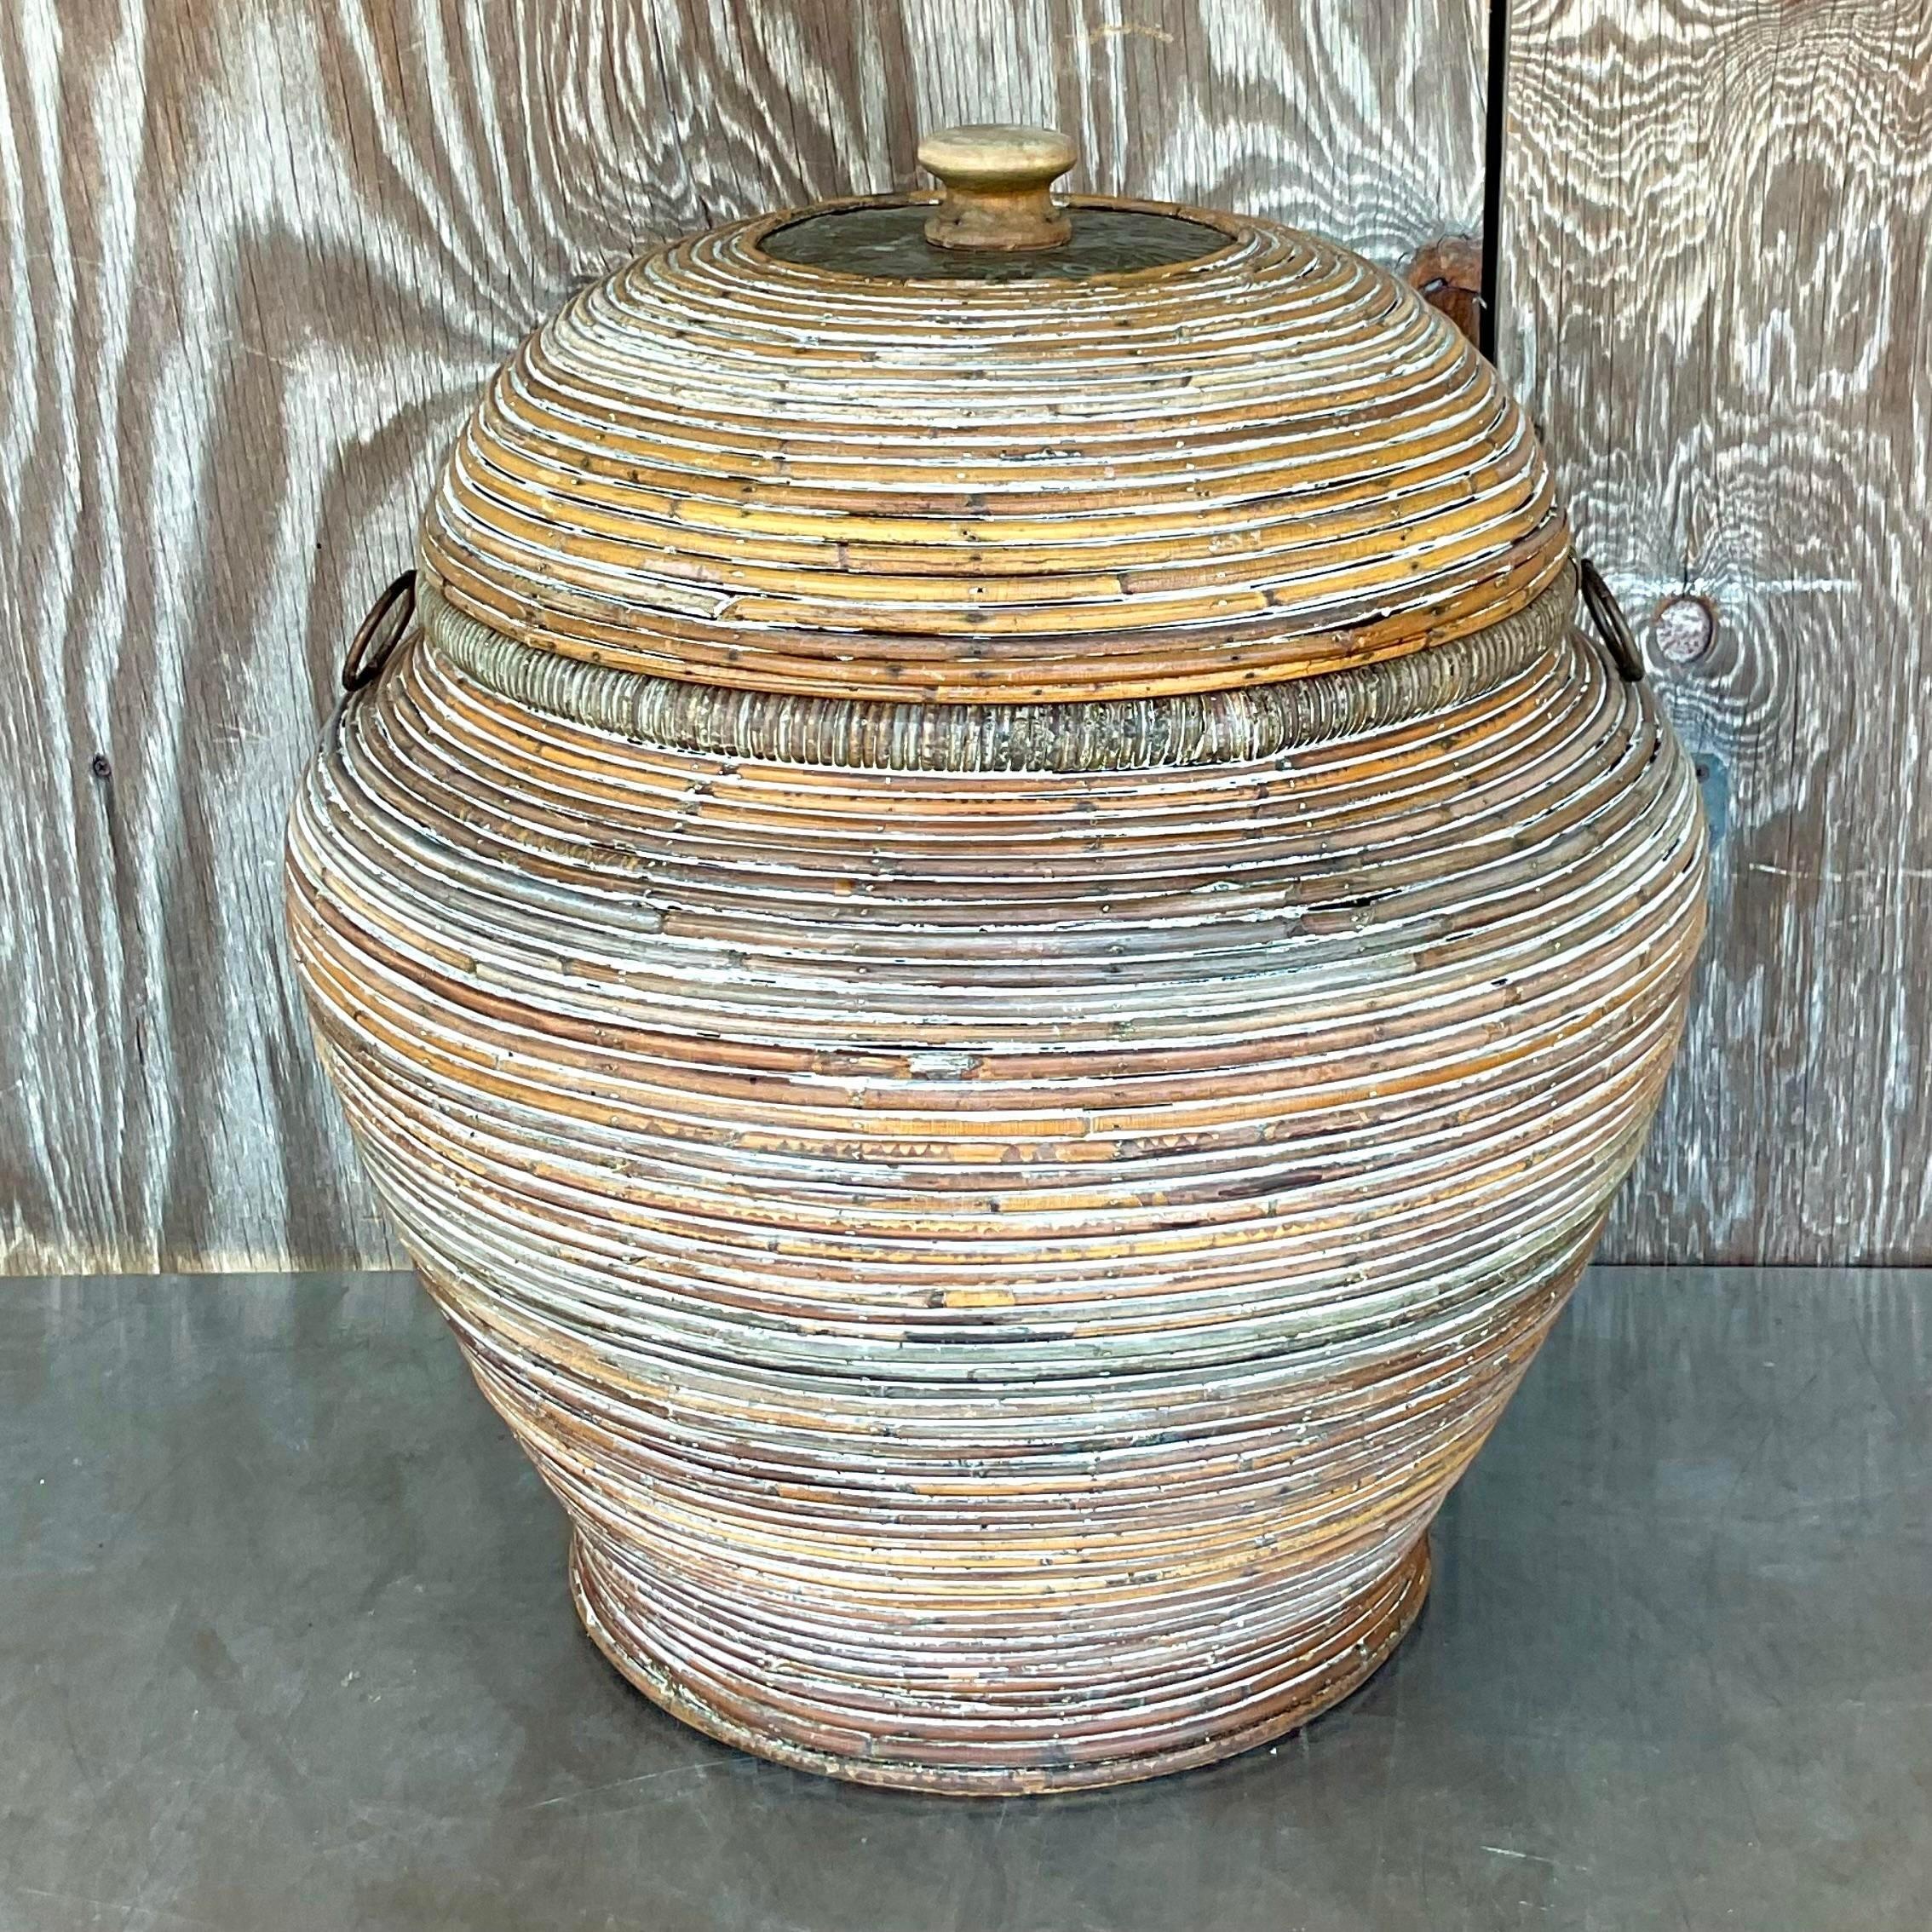 Organize with coastal charm using our Vintage Coastal Washed Pencil Reed Lidded Basket, a fusion of American craftsmanship and seaside elegance. Handcrafted with meticulous attention to detail, this basket features a washed finish that evokes the